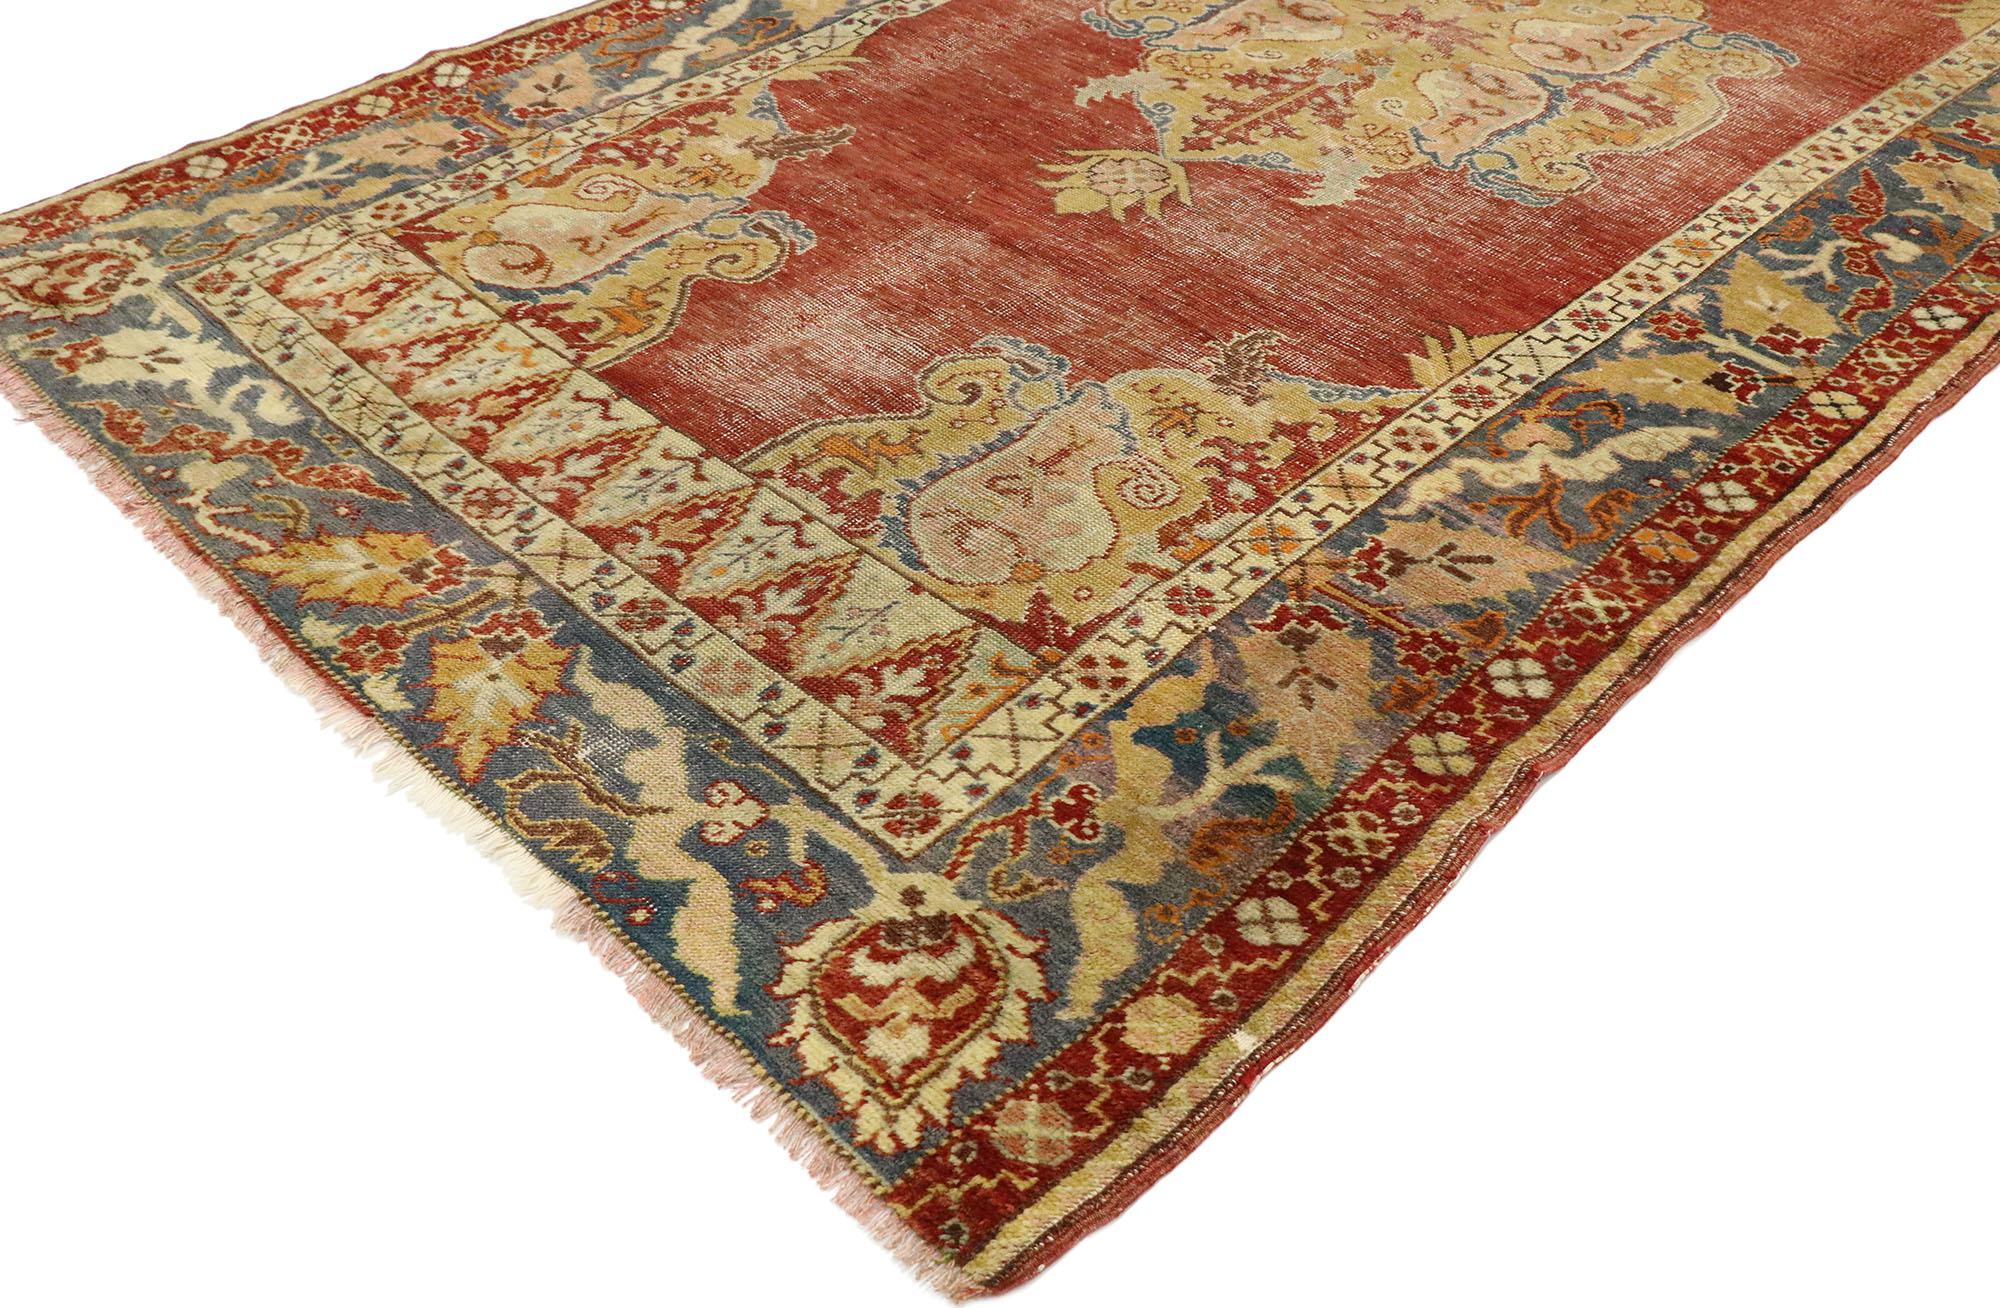 53149, vintage Turkish Oushak rug with southern living neoclassical style. Lovingly timeworn with timeless design rustic sensibility, this hand-knotted wool distressed vintage Turkish Oushak rug beautifully embodies Southern Living Neoclassical